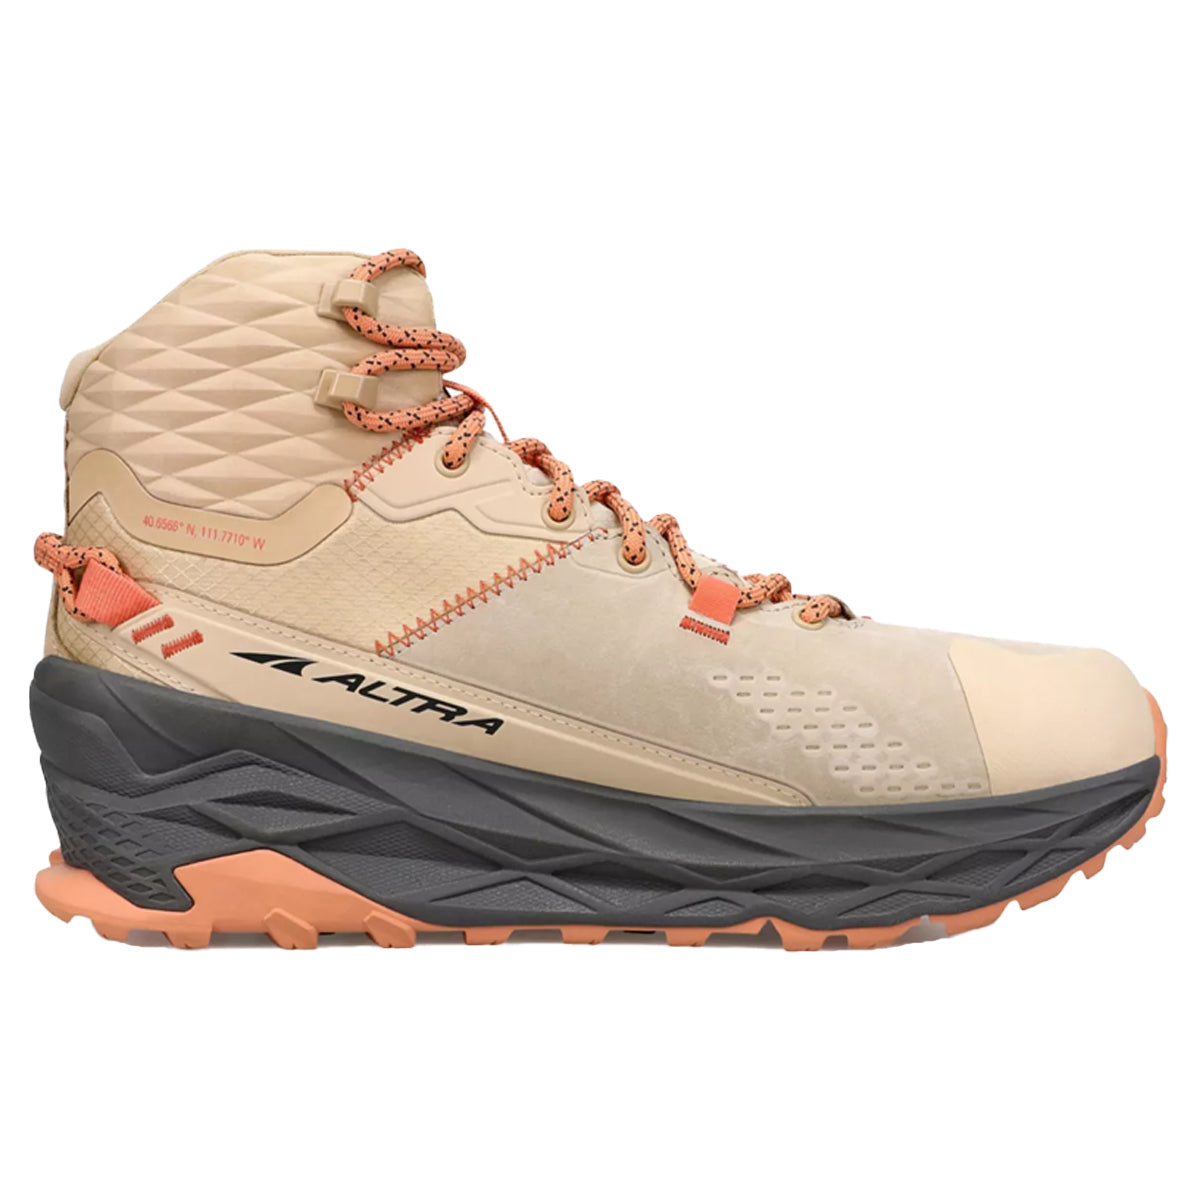 Altra Women's Olympus 5 Hike Mid GTX in Sand by GOHUNT | Altra - GOHUNT Shop